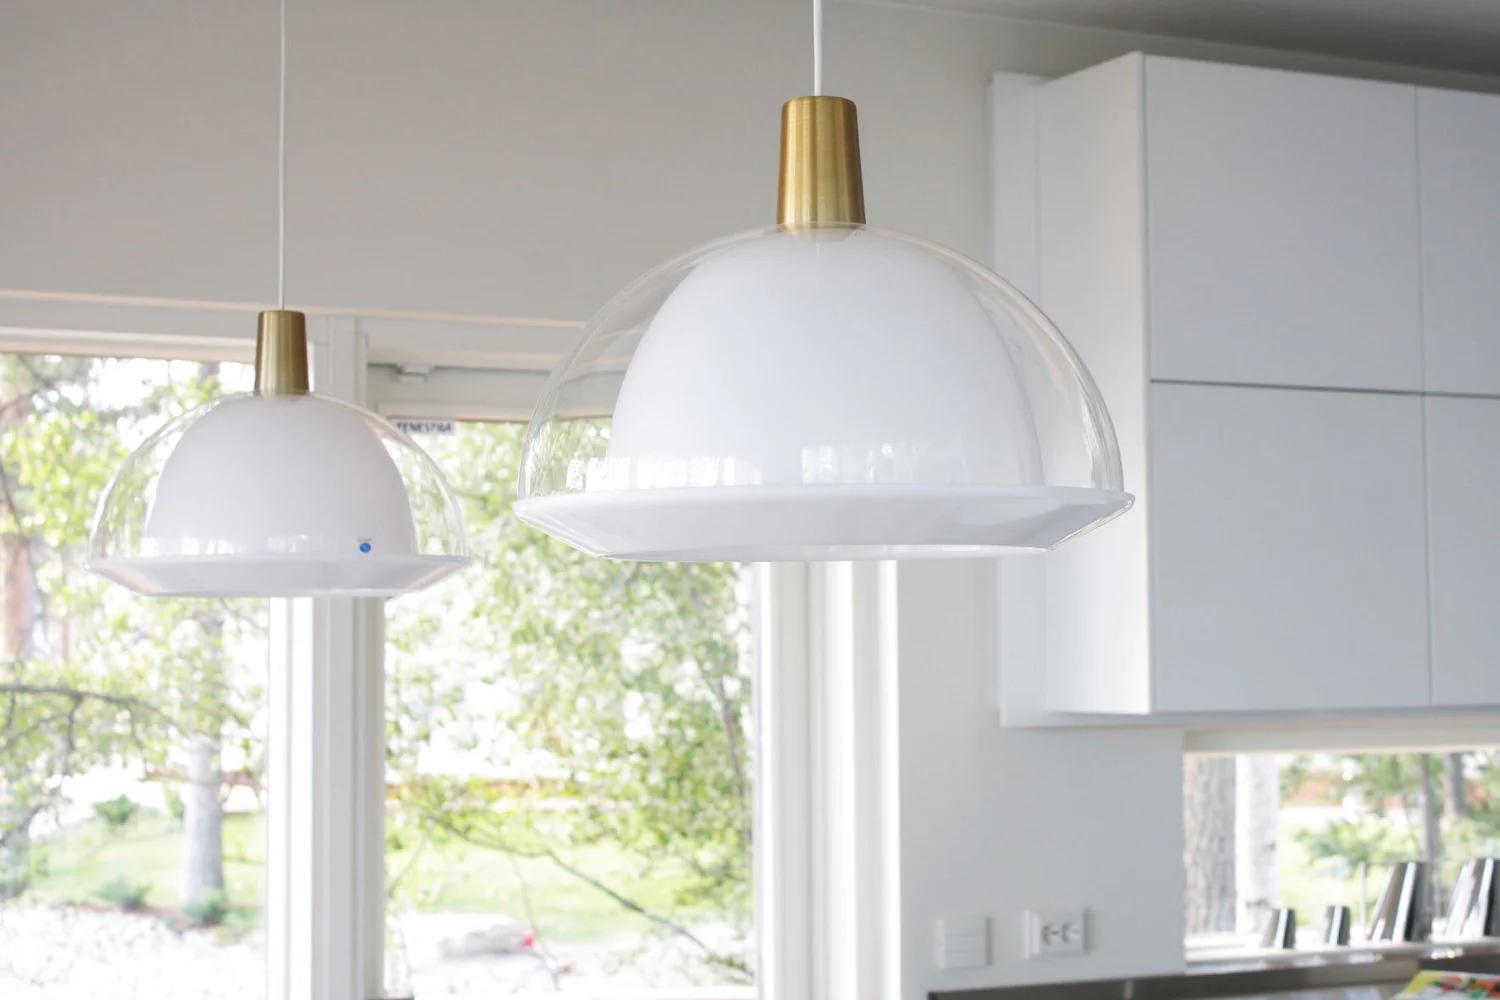 Pair of Large Yki Nummi Transparent 'Kuplat' Pendants. Designed in 1959, Nummi's iconic light consists of two acrylic shades of different colors, one nesting inside the other. The name Kuplat means bubbles in Finnish. As Nummi once astutely